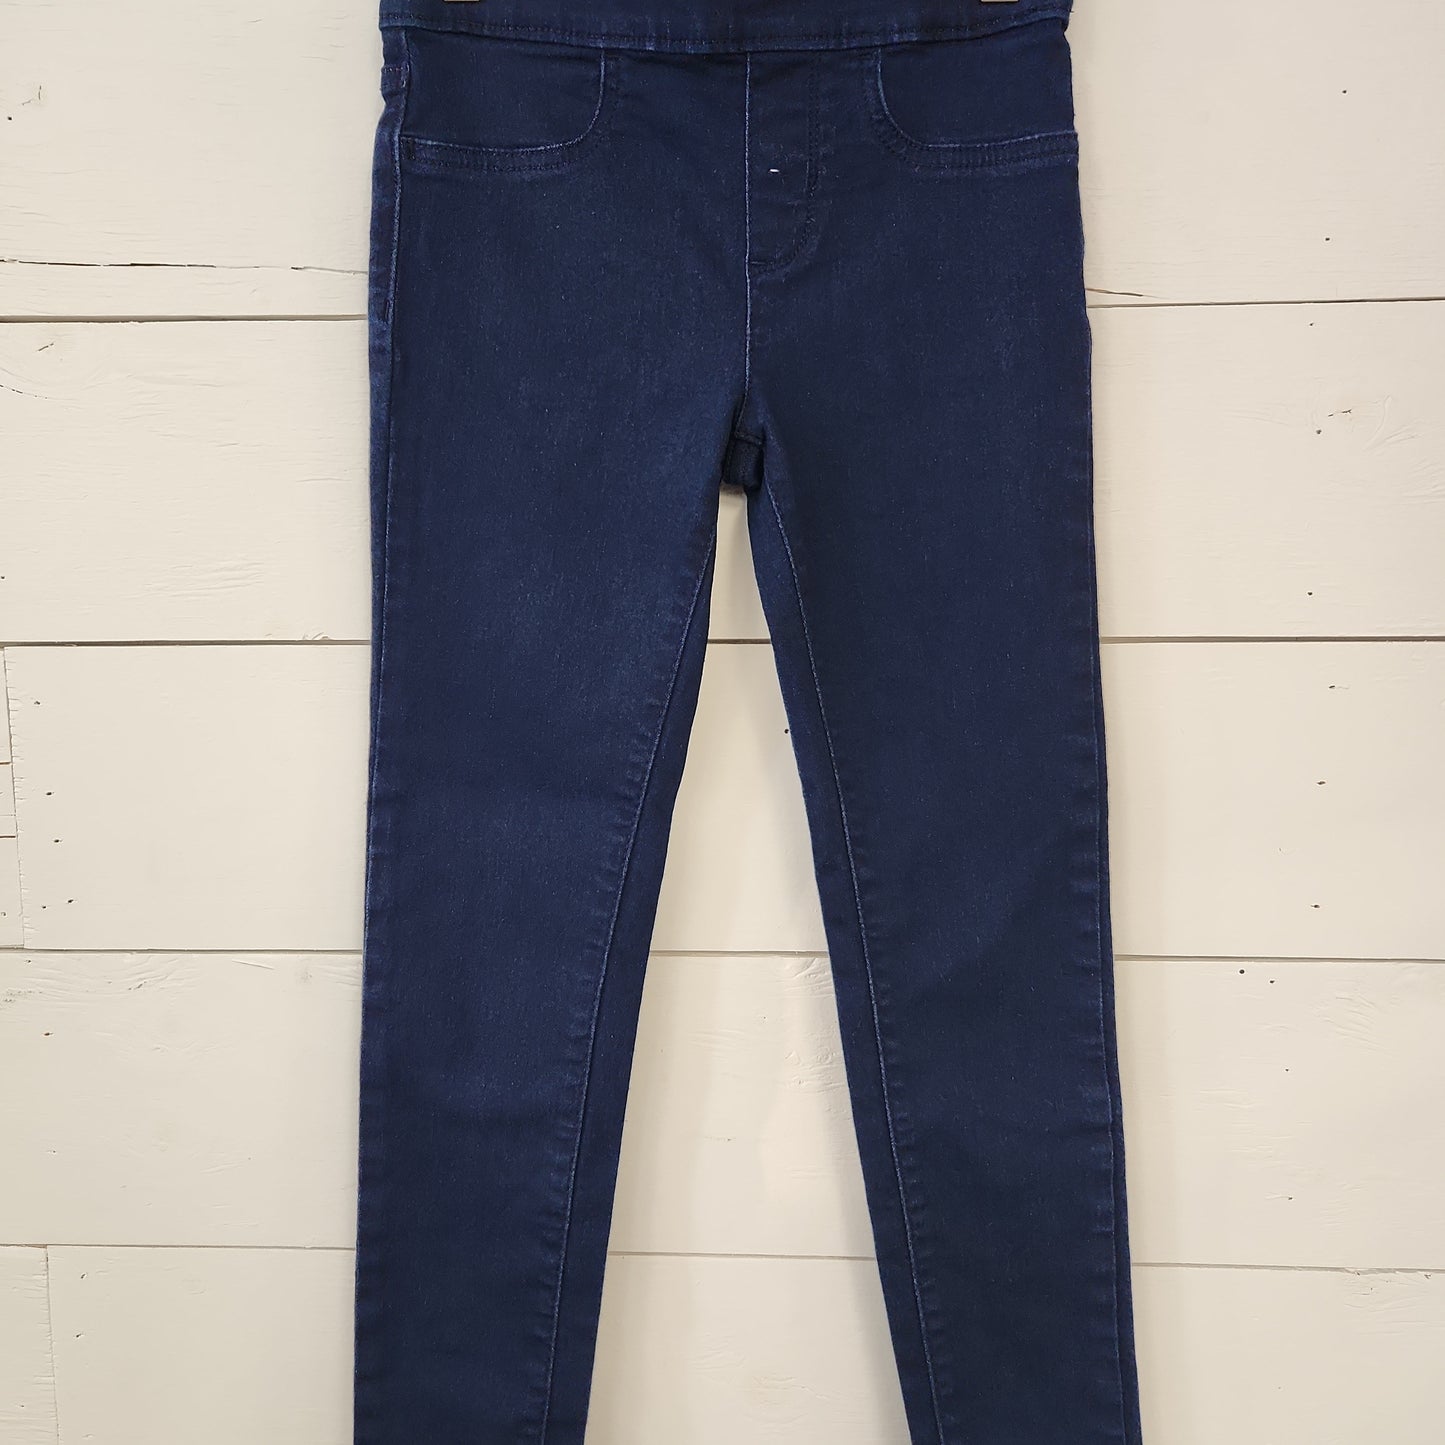 Size 8 | Levi's Pull-On Jegging Pants | Secondhand